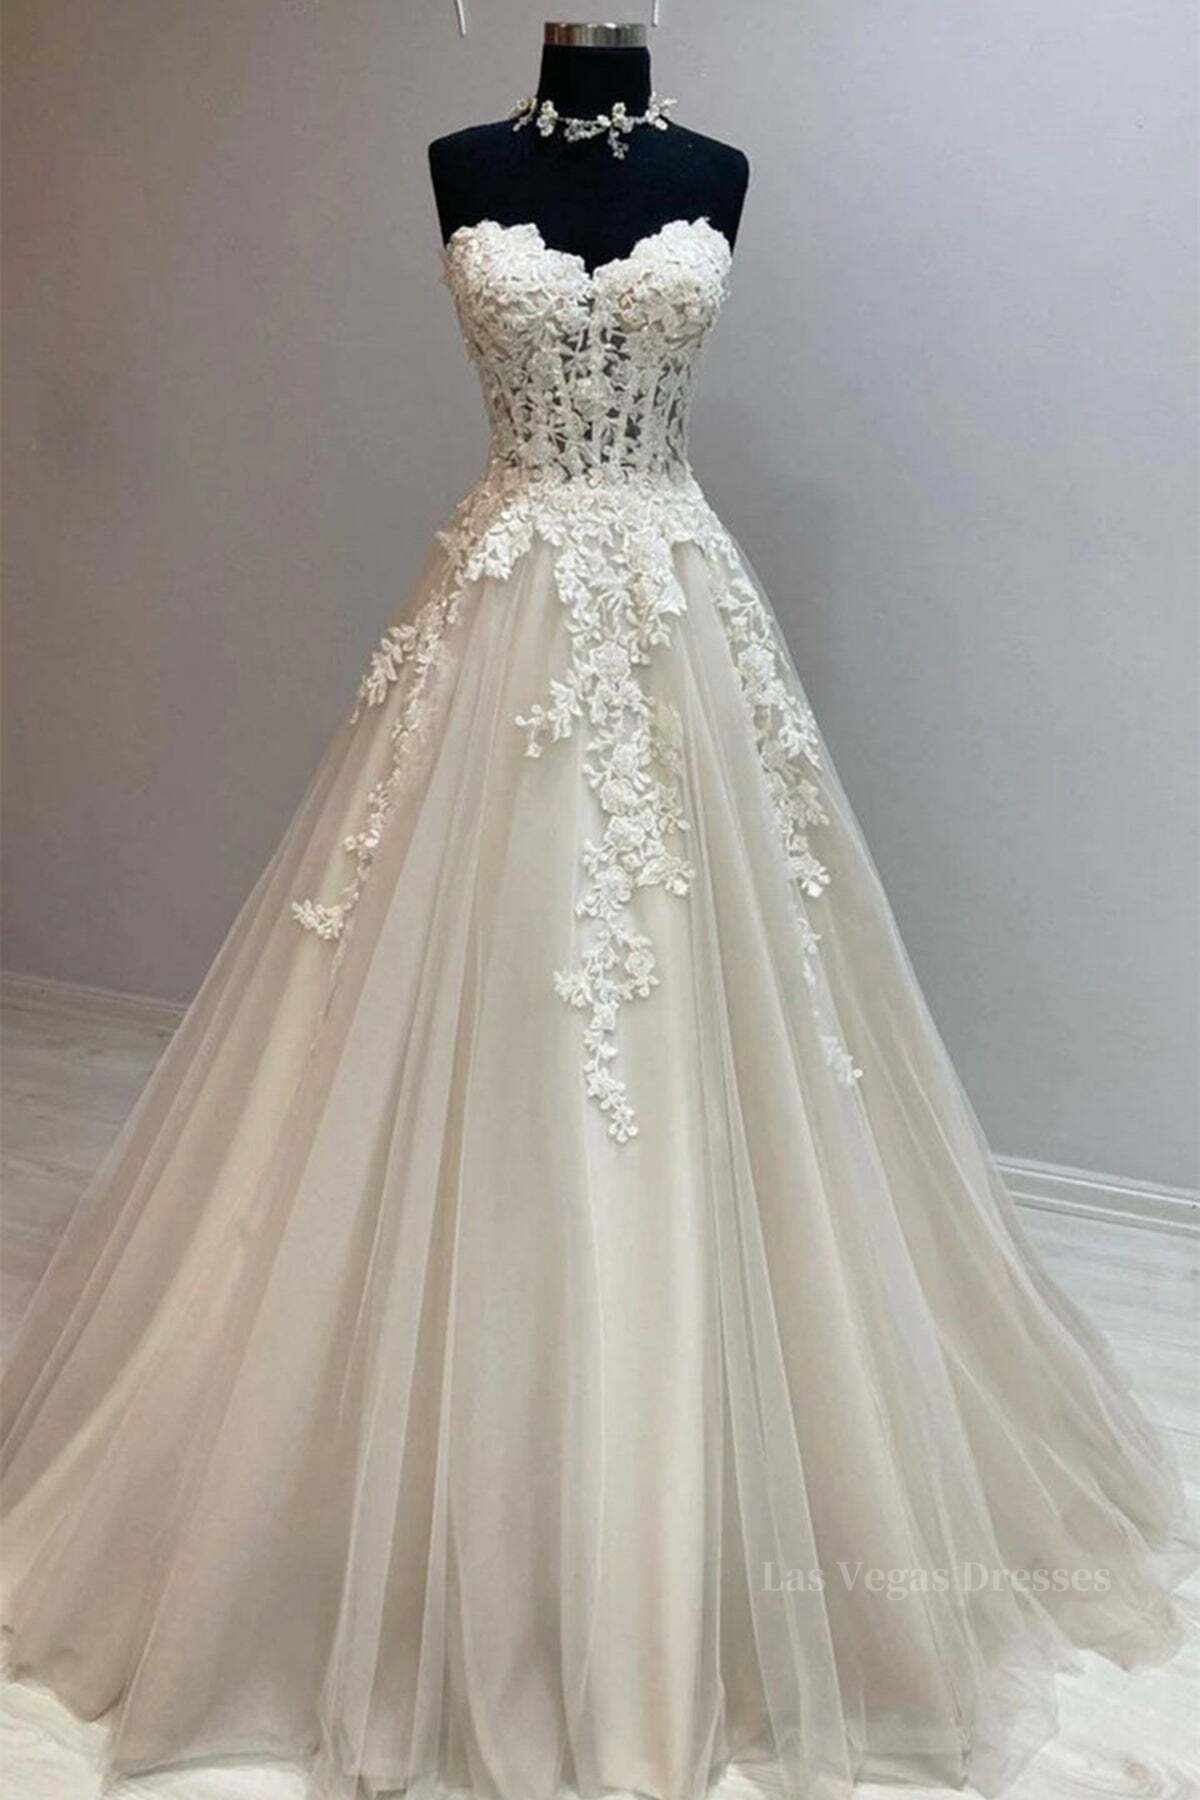 Sweetheart Neck Champagne Tulle Lace Long Prom Dresses, Strapless Champagne Formal Dresses, Champagne Lace Evening Dresses